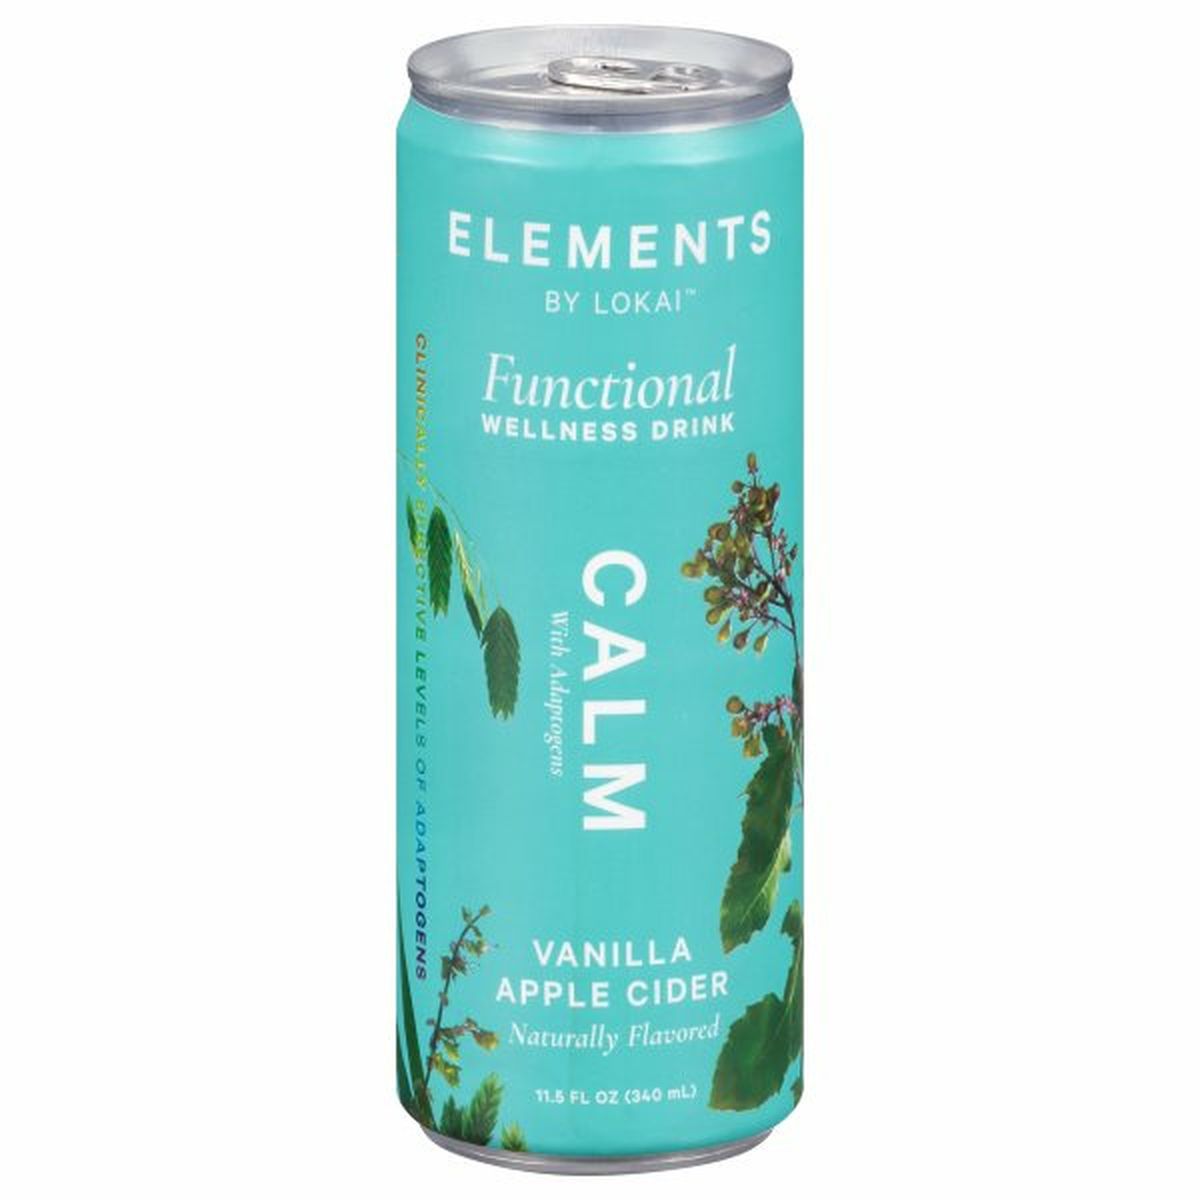 Calories in Elements By Lokai Functional Wellness Drink, Vanilla Apple Cider, Calm